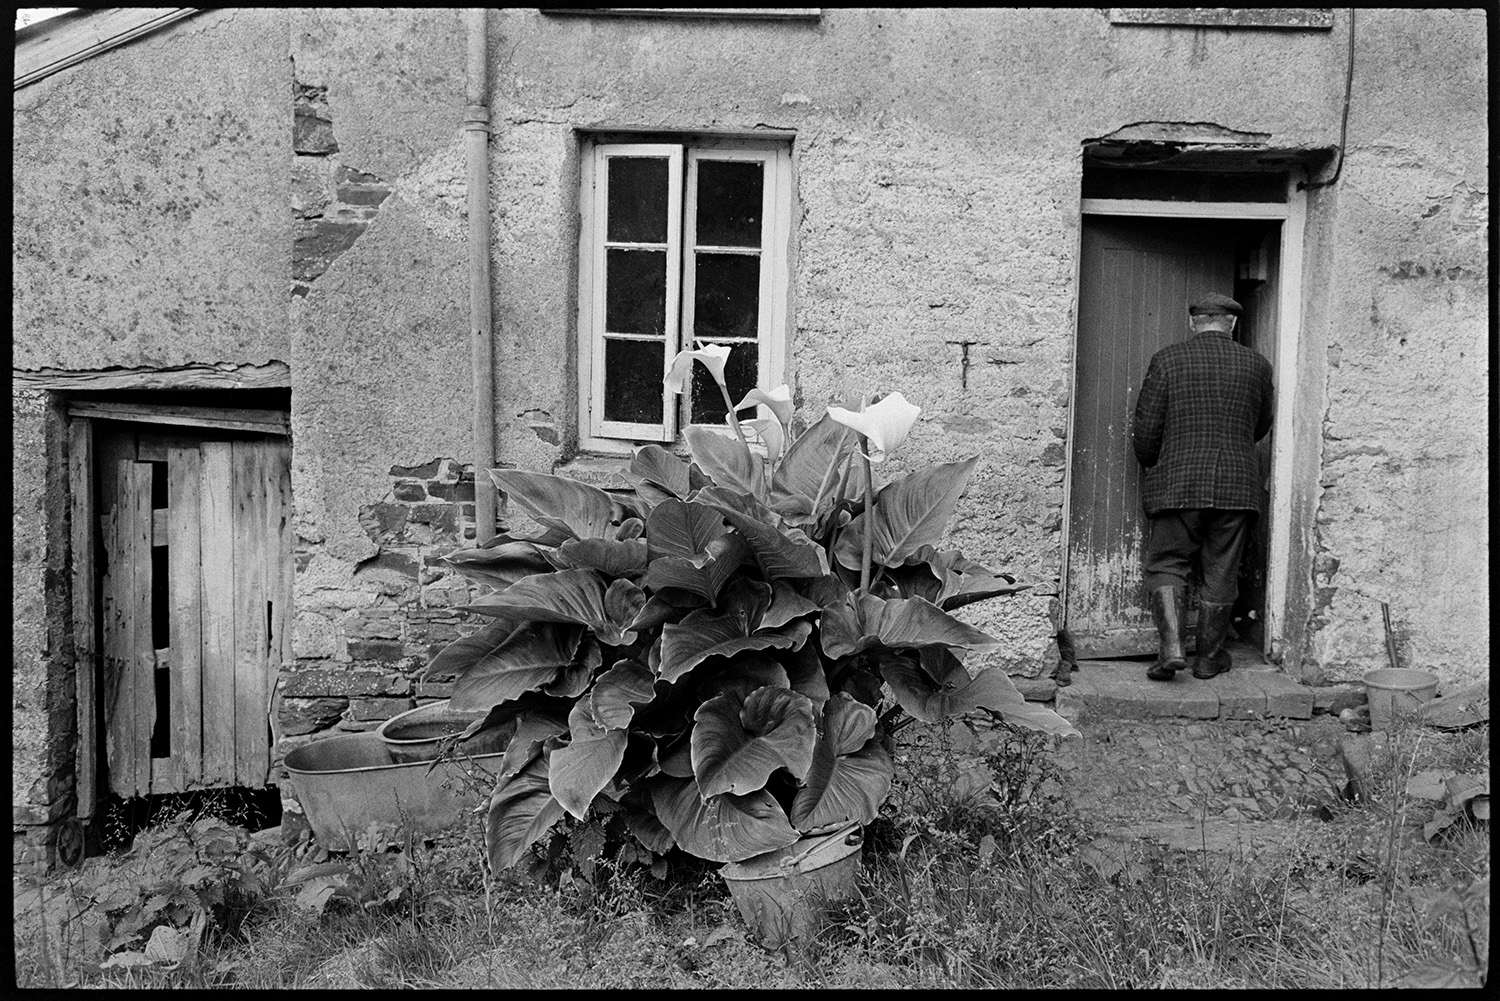 Front of house, cow and shed. 
[Ivor Brock going into his house at Millhams, Dolton. A large lily is growing outside the front of the house by an old tin bath.]